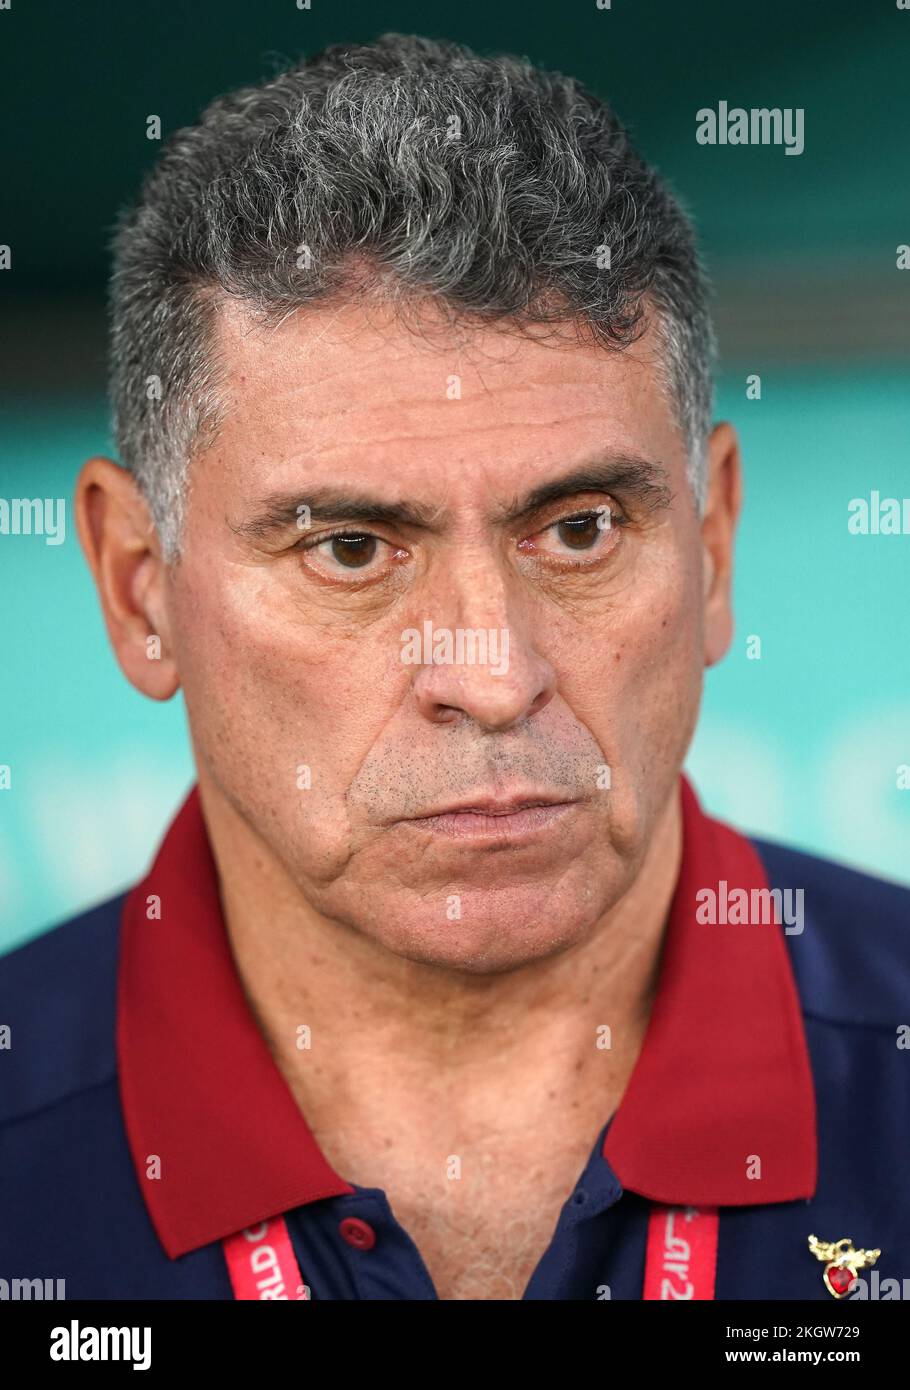 Costa Rica manager Luis Fernando Suarez during the FIFA World Cup Group E match at the Al Thumama Stadium, Doha. Picture date: Wednesday November 23, 2022. Stock Photo